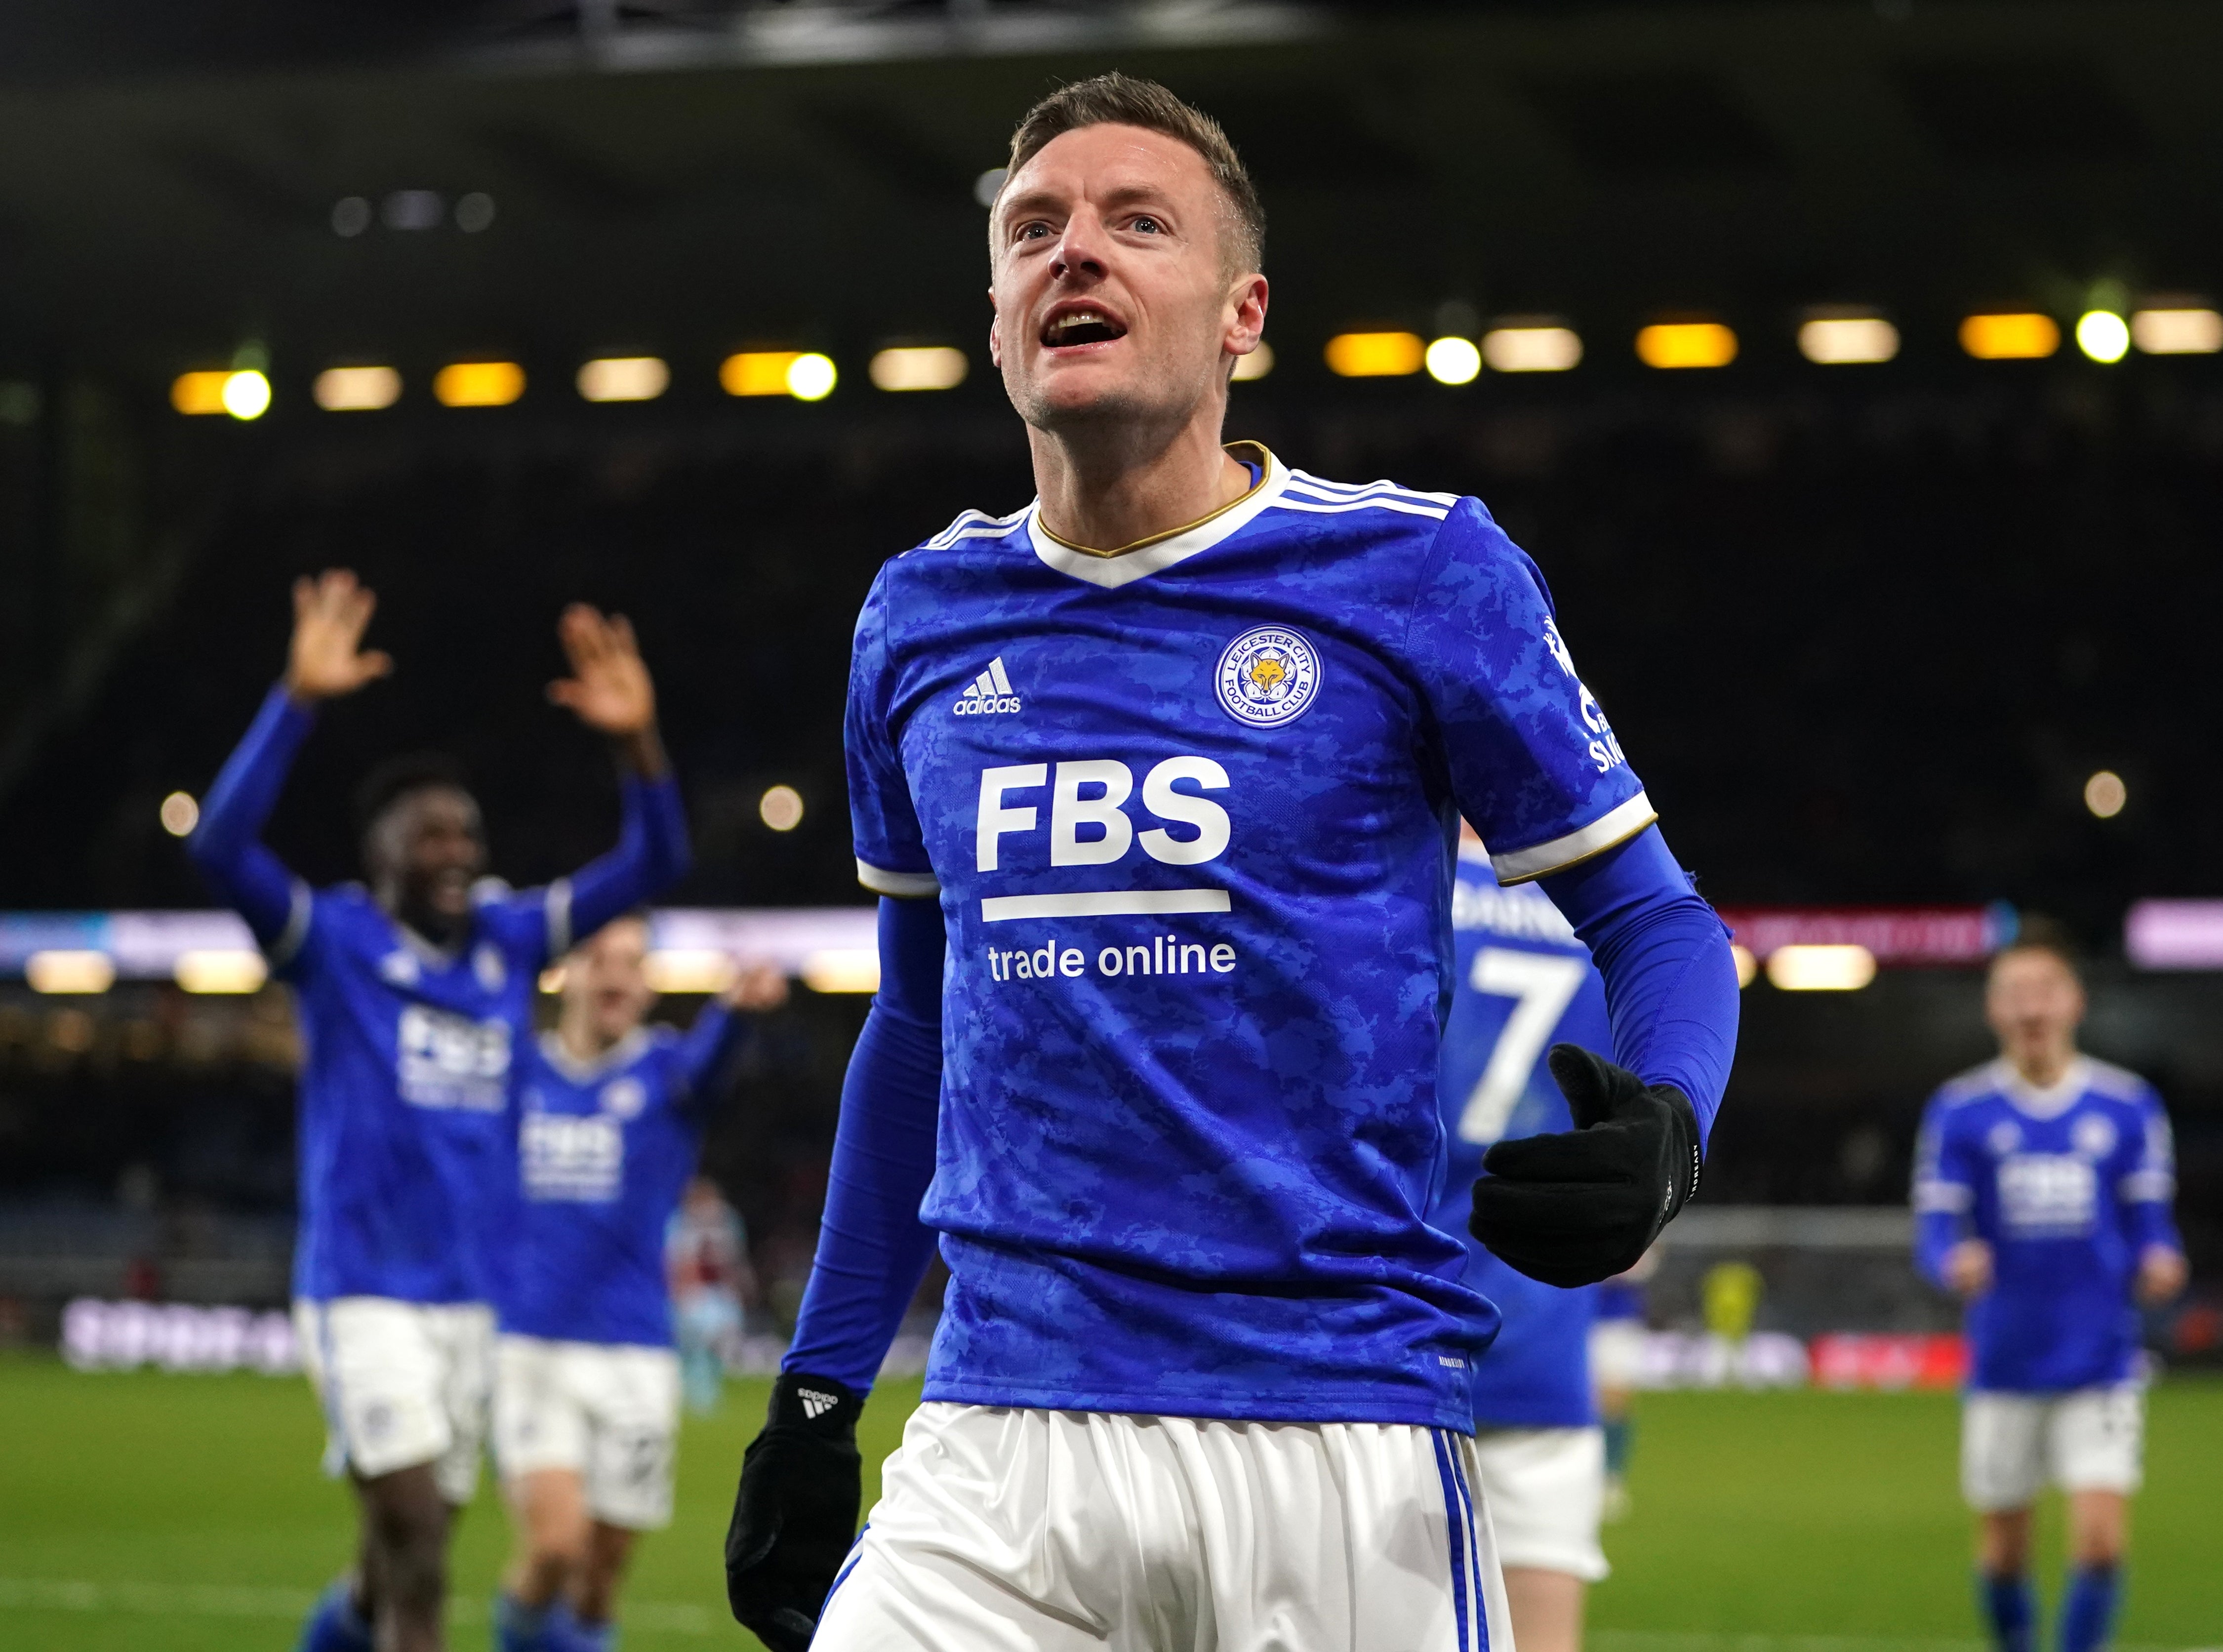 Jamie Vardy starred on his return from injury for Leicester